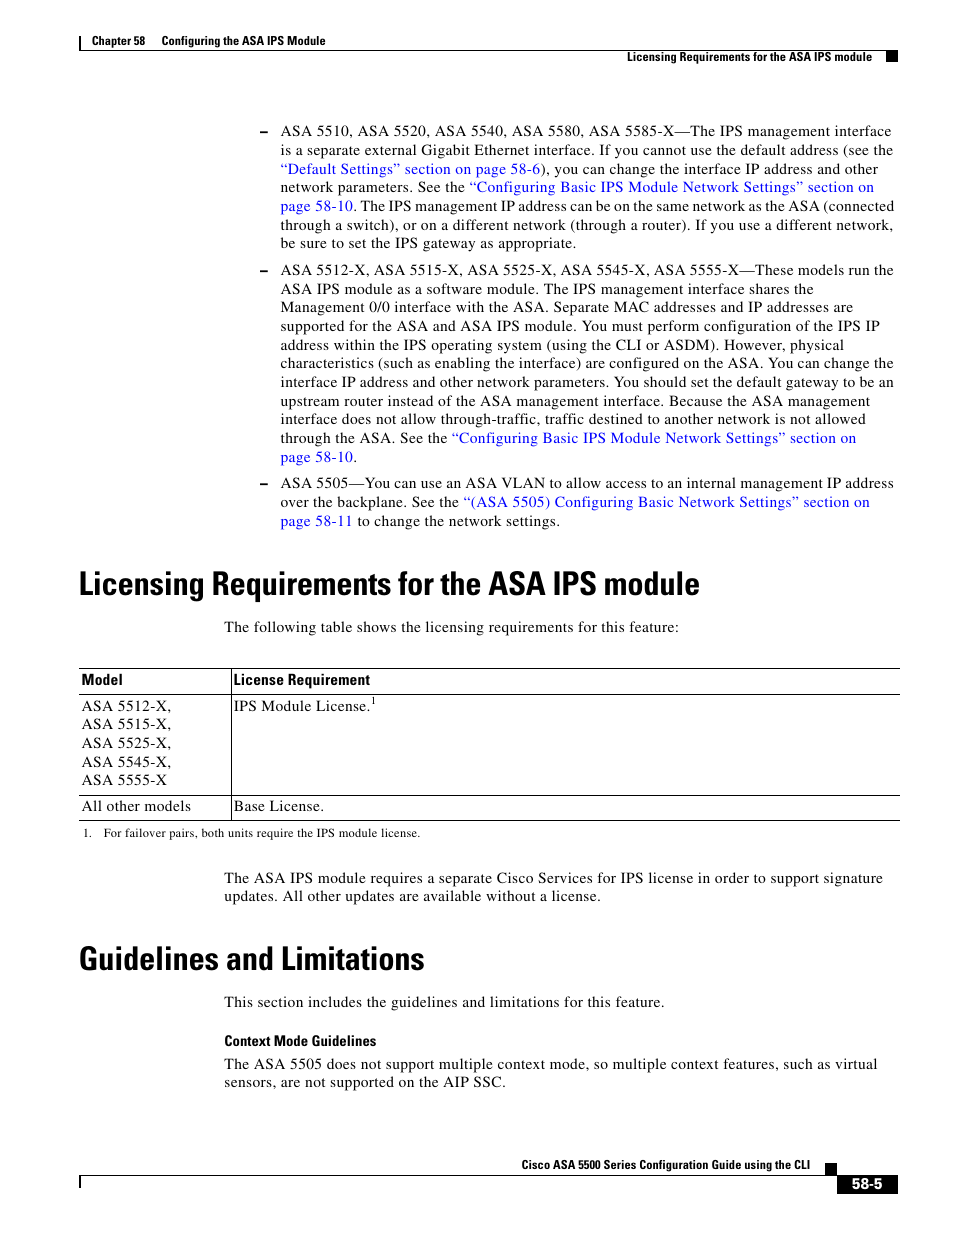 Licensing requirements for the asa ips module, Guidelines and limitations | Cisco ASA 5505 User Manual | Page 1225 / 1994